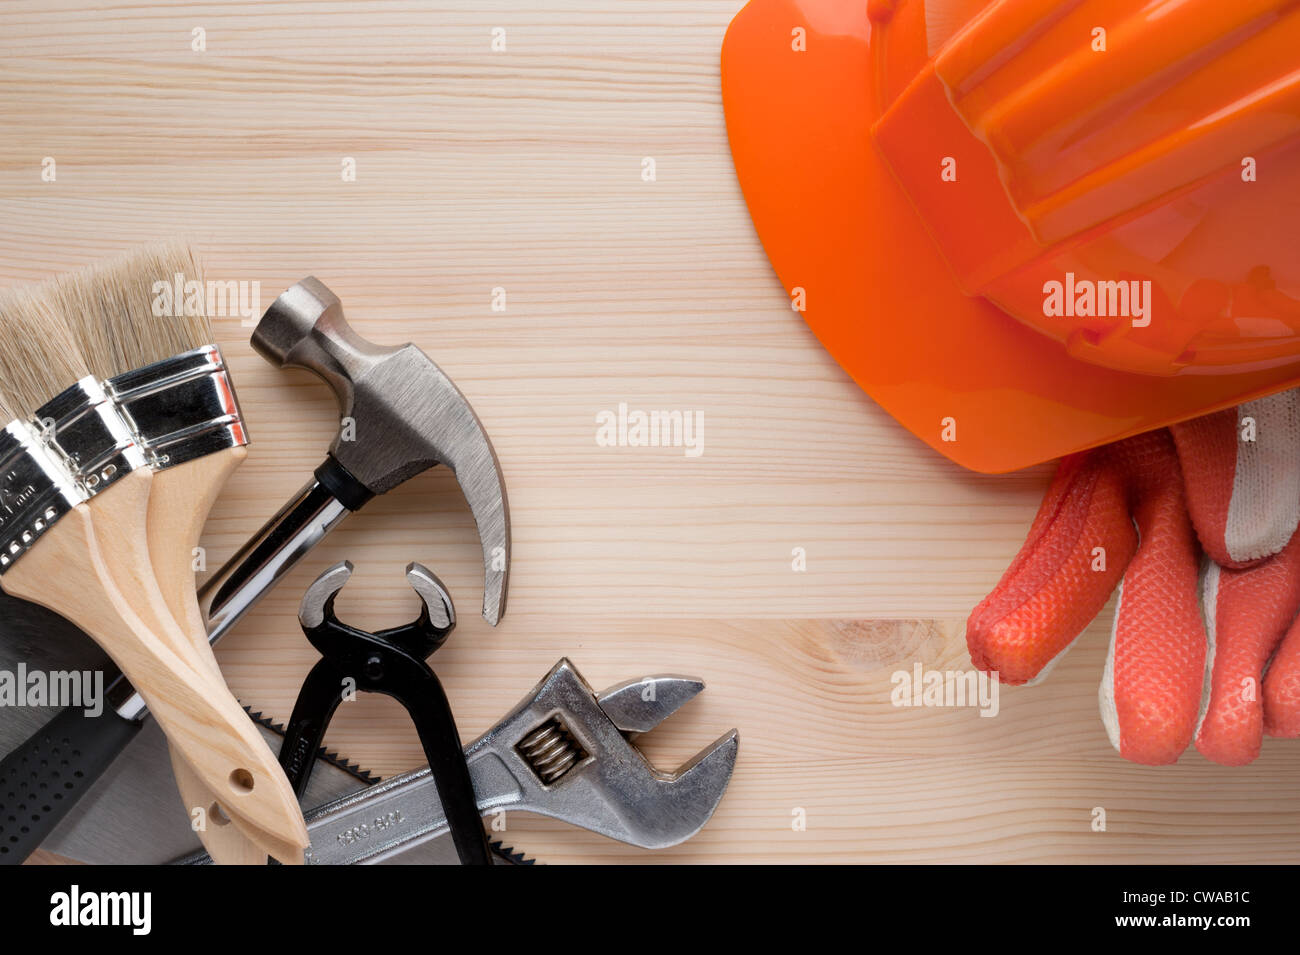 Hardhat, gloves and some assorted tools arranged on a wooden surface. Construction, repair or home improvement background. Stock Photo